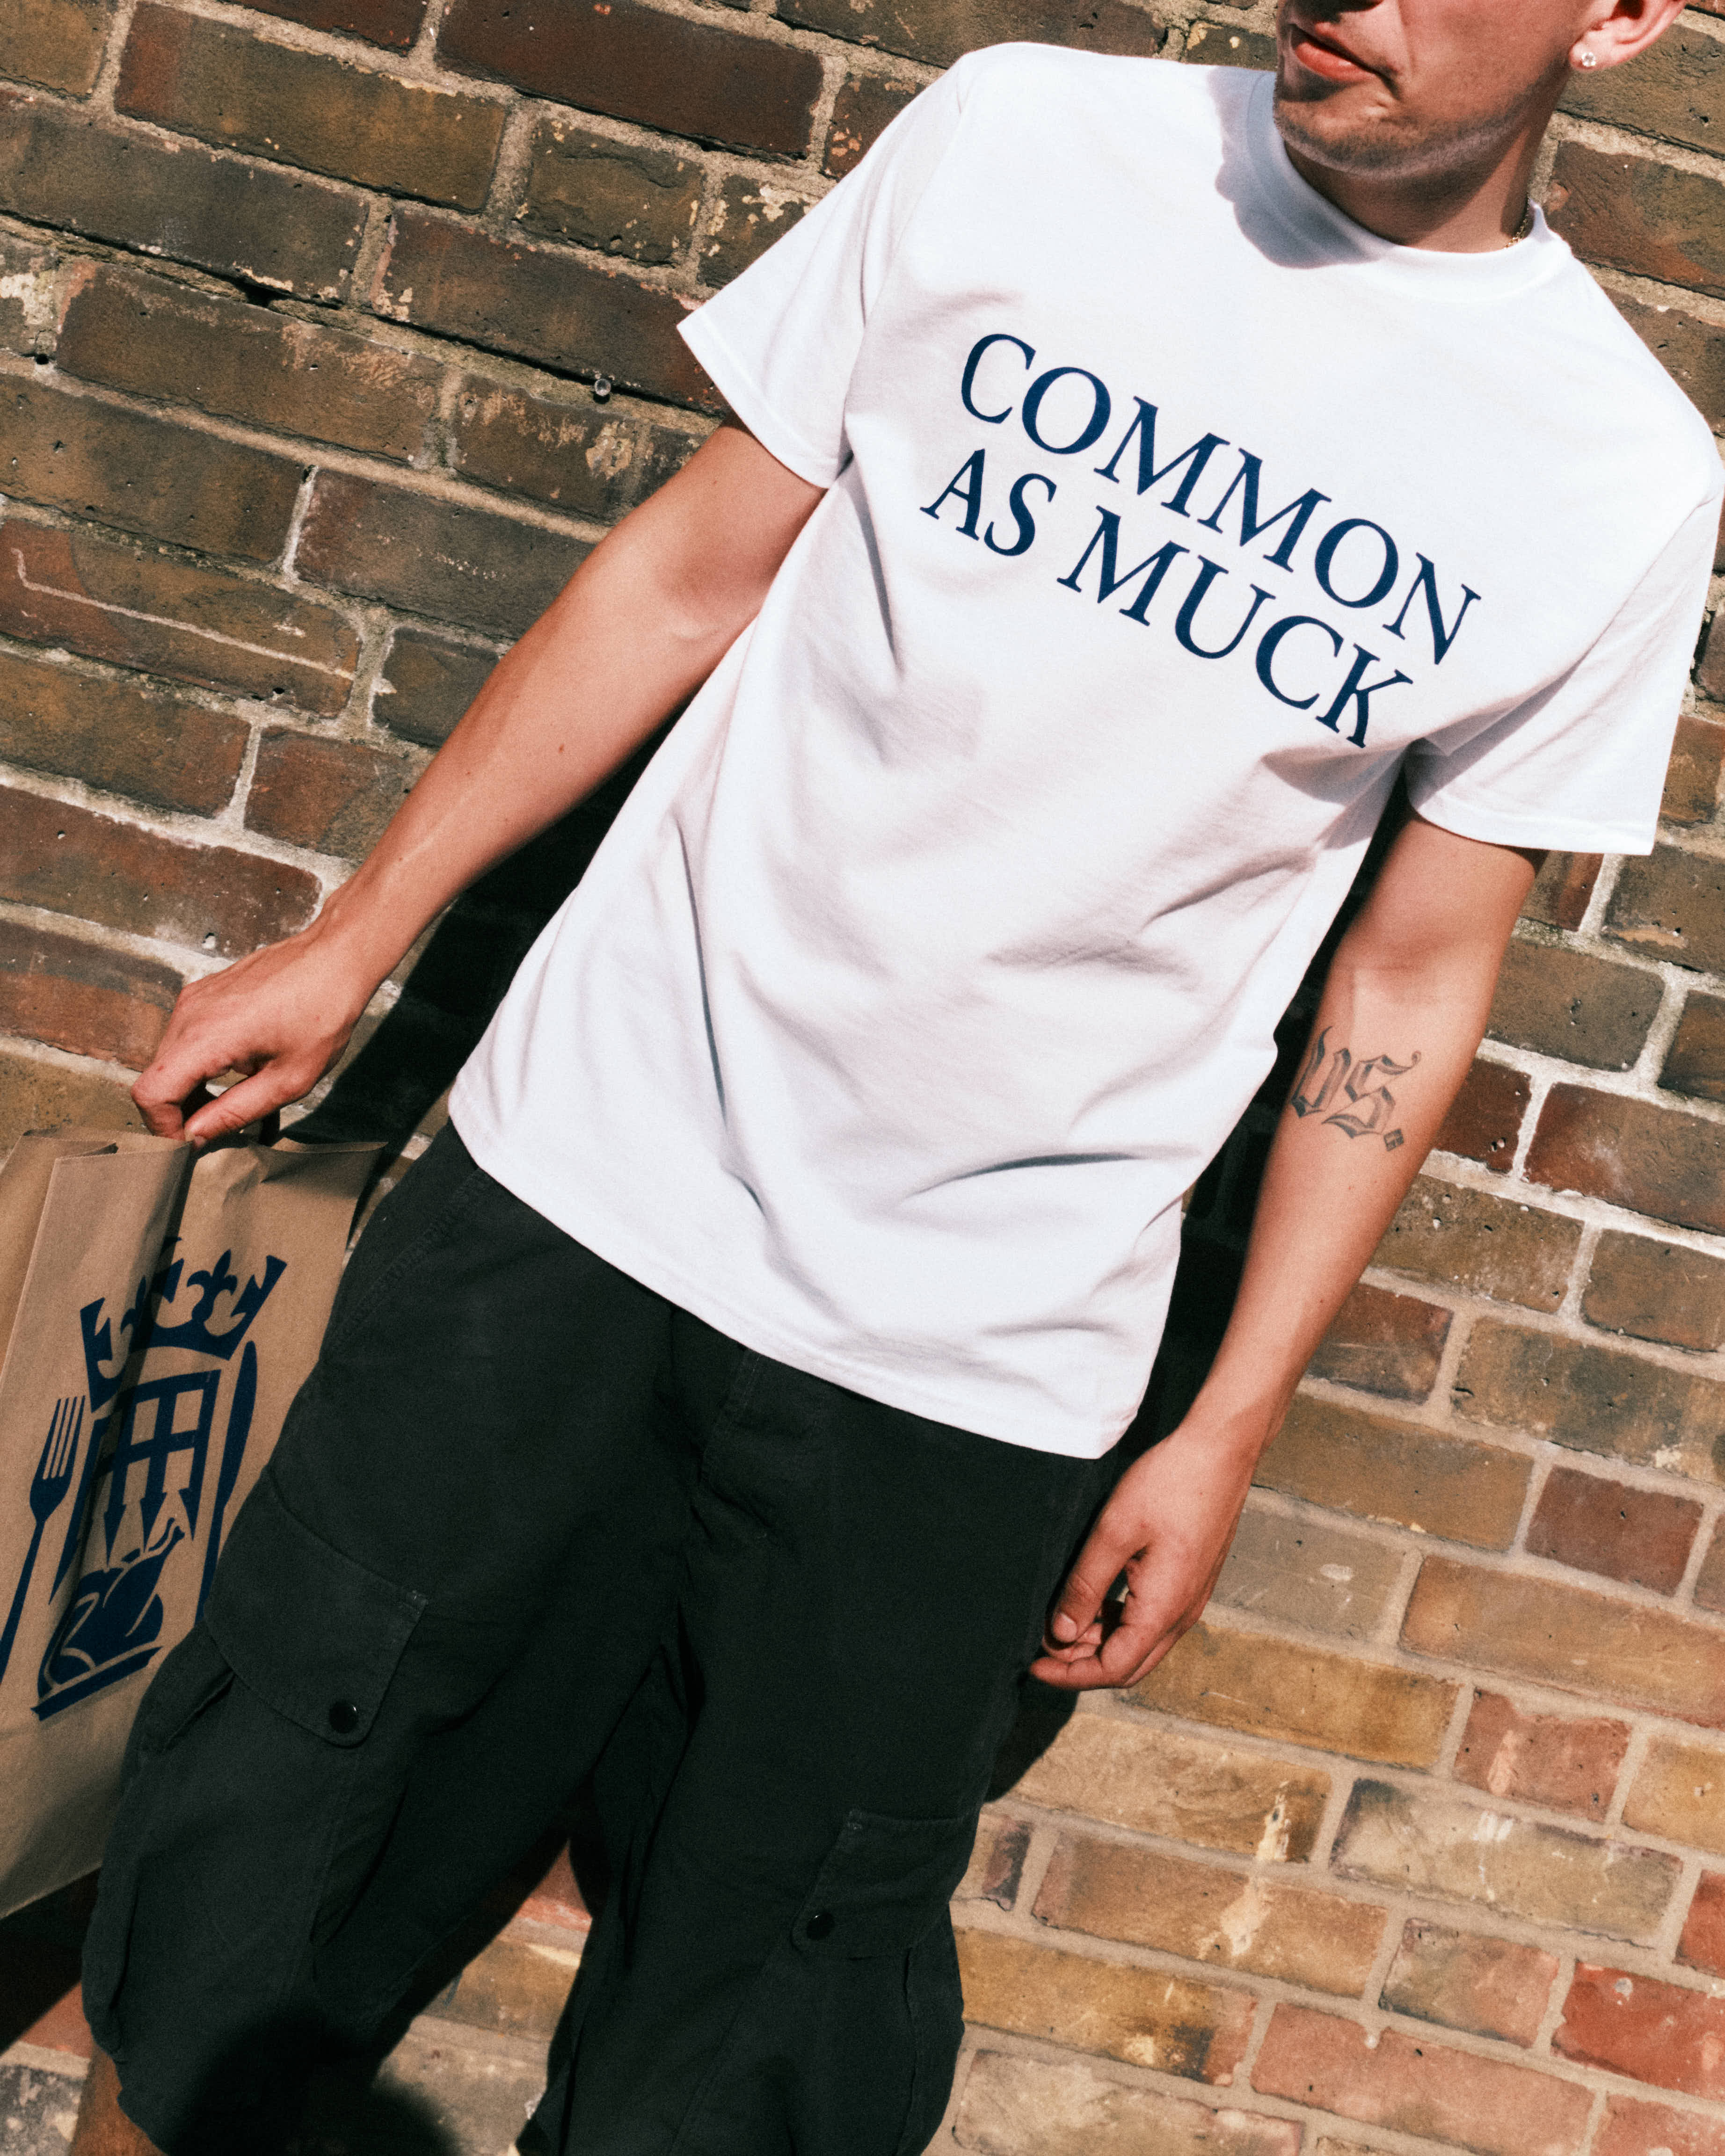 The campaign features a range of slogan T-shirts produced by the British artist Corbin Shaw